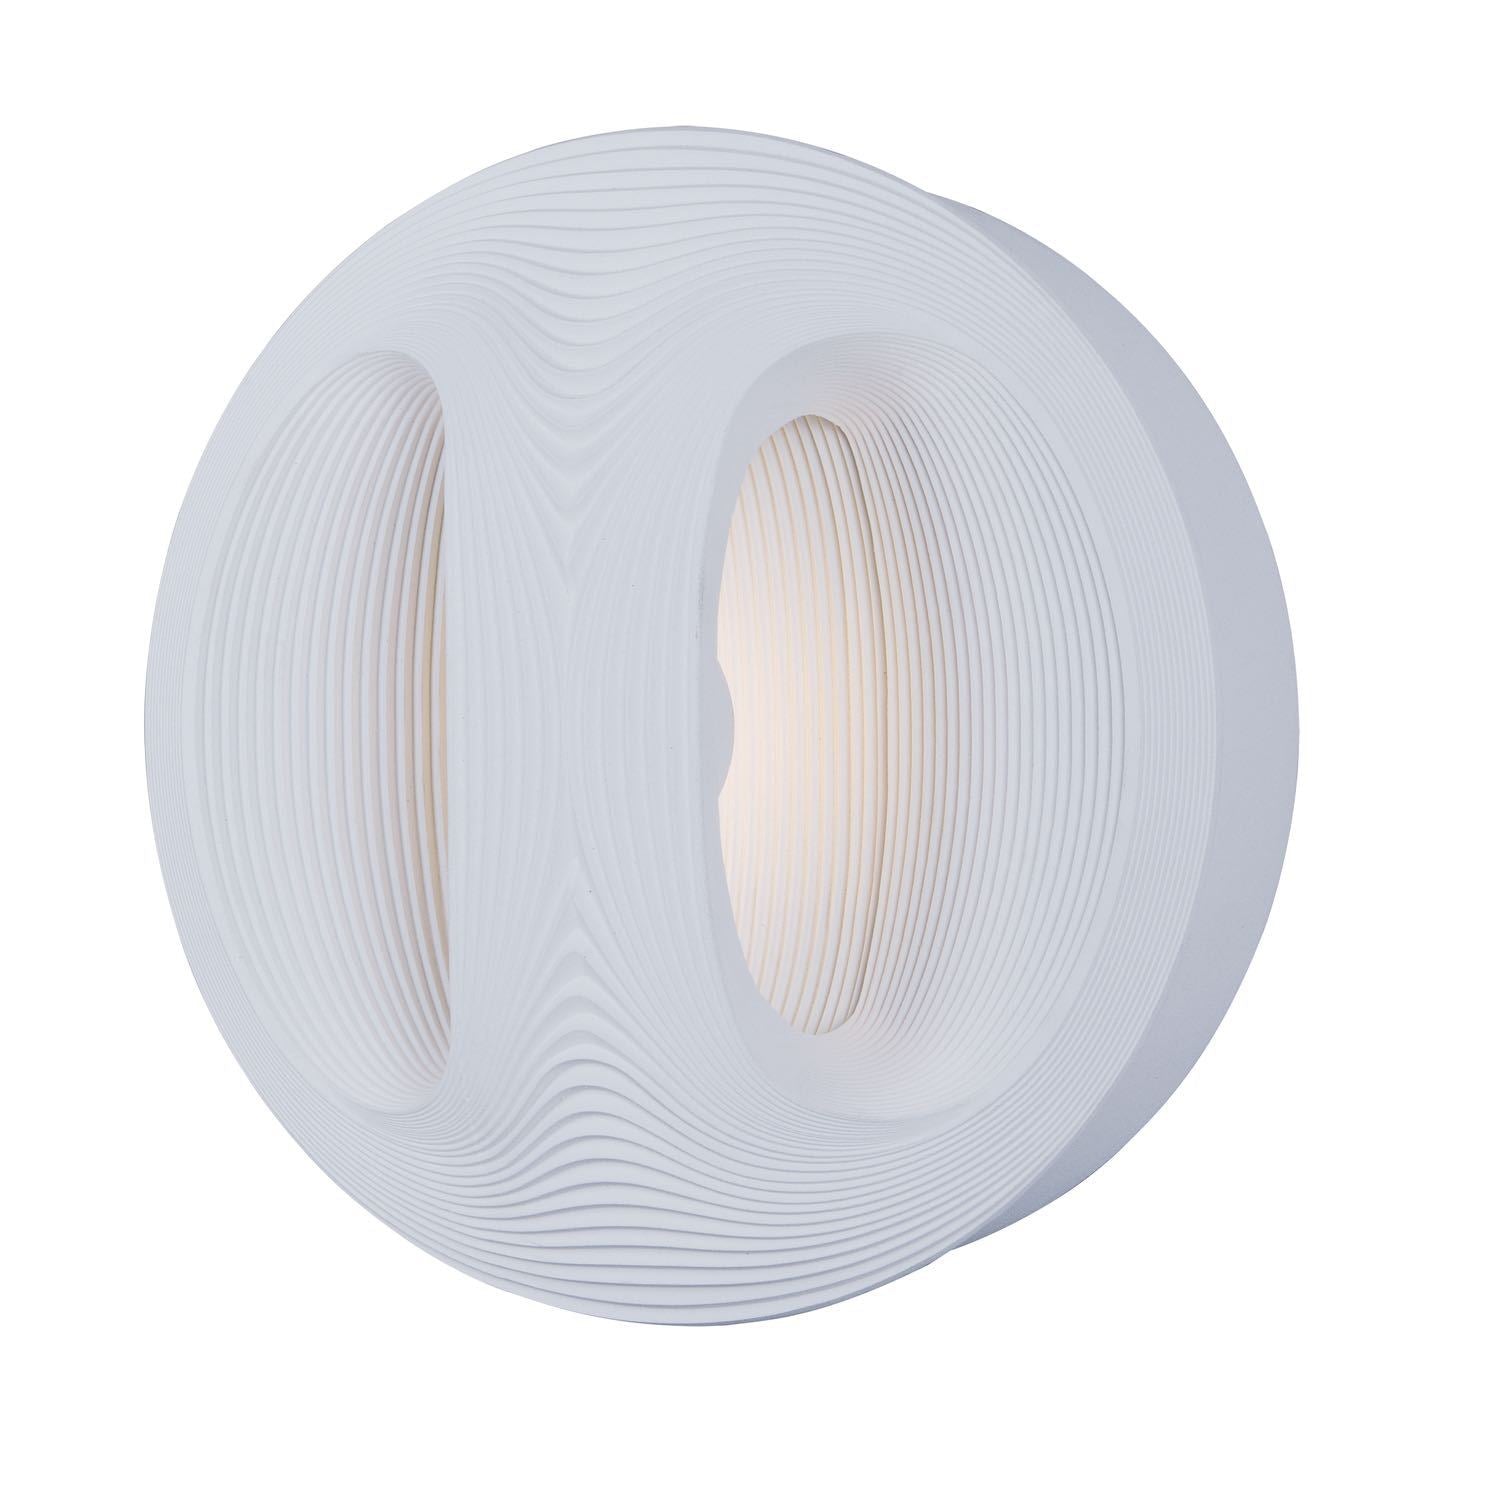 Influx Outdoor Wall Light White